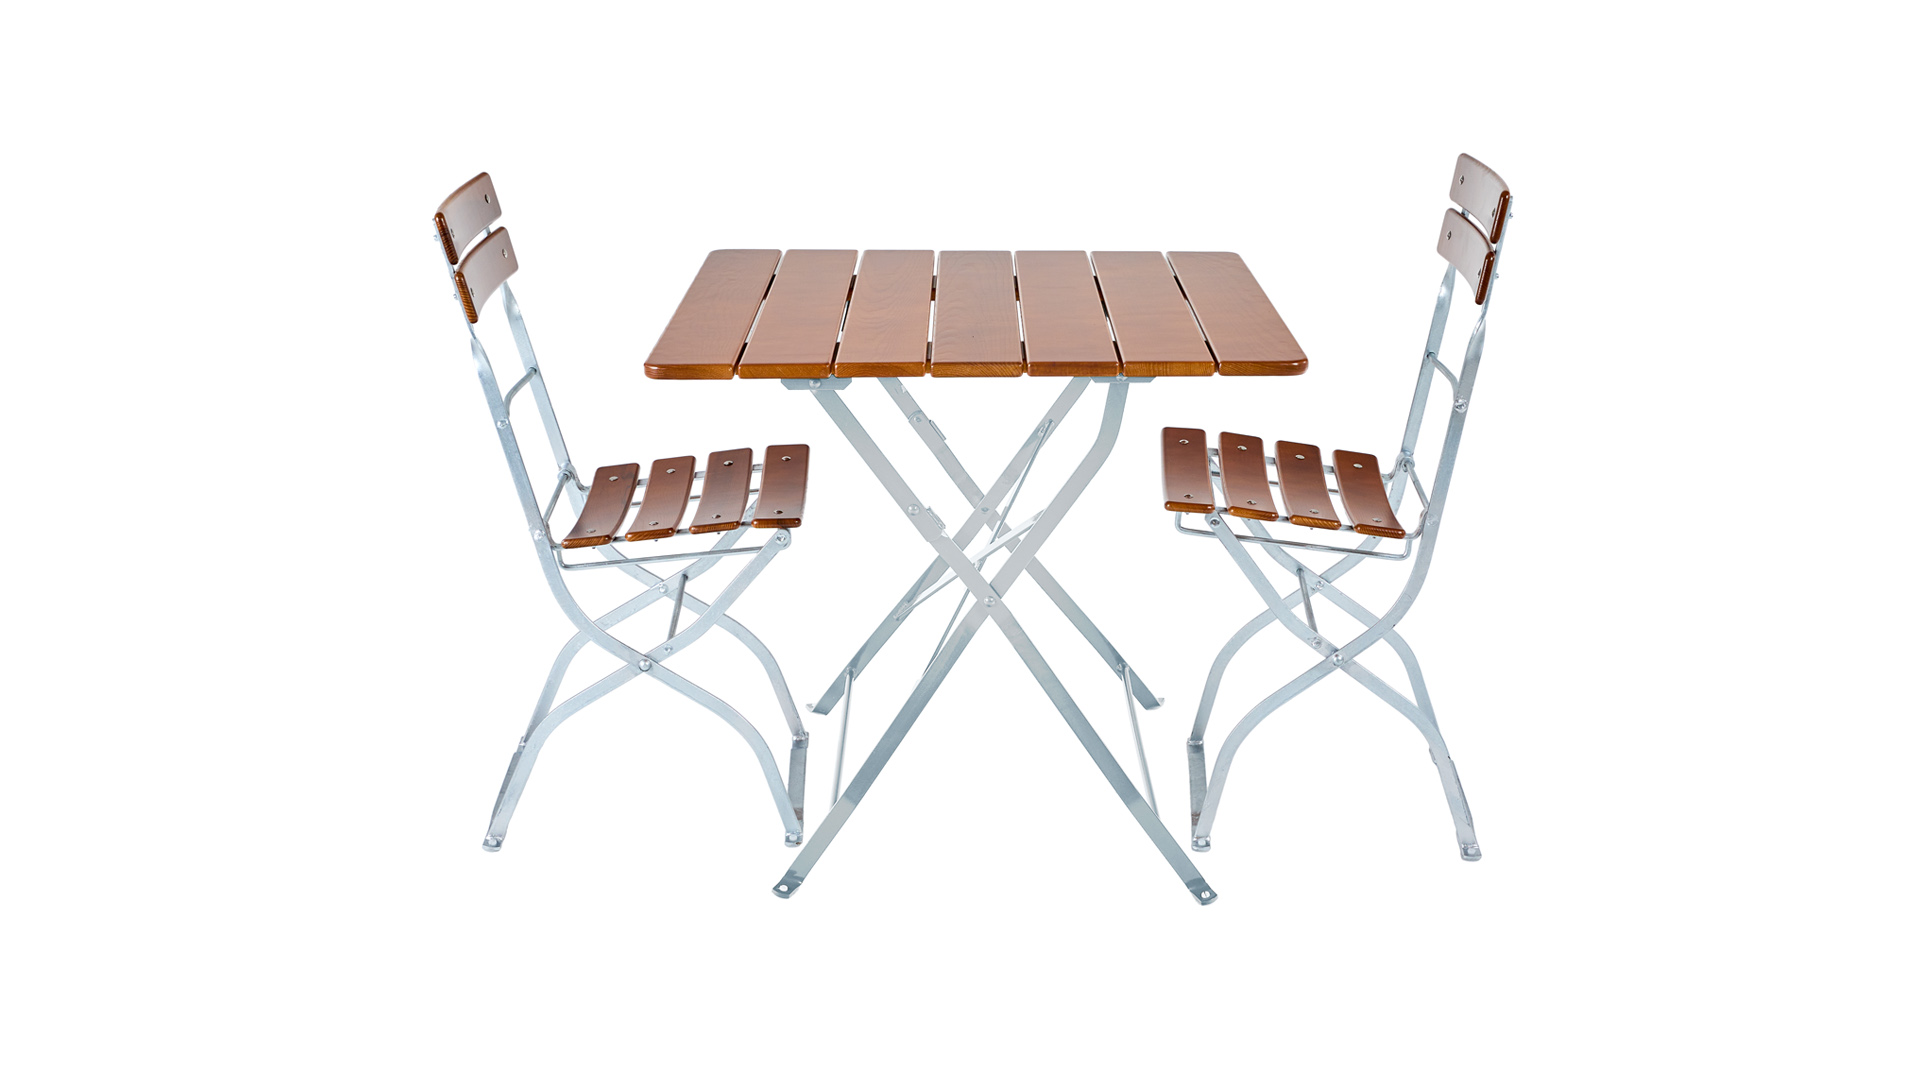 Square beer garden table is shown with two beer garden chairs frontally.